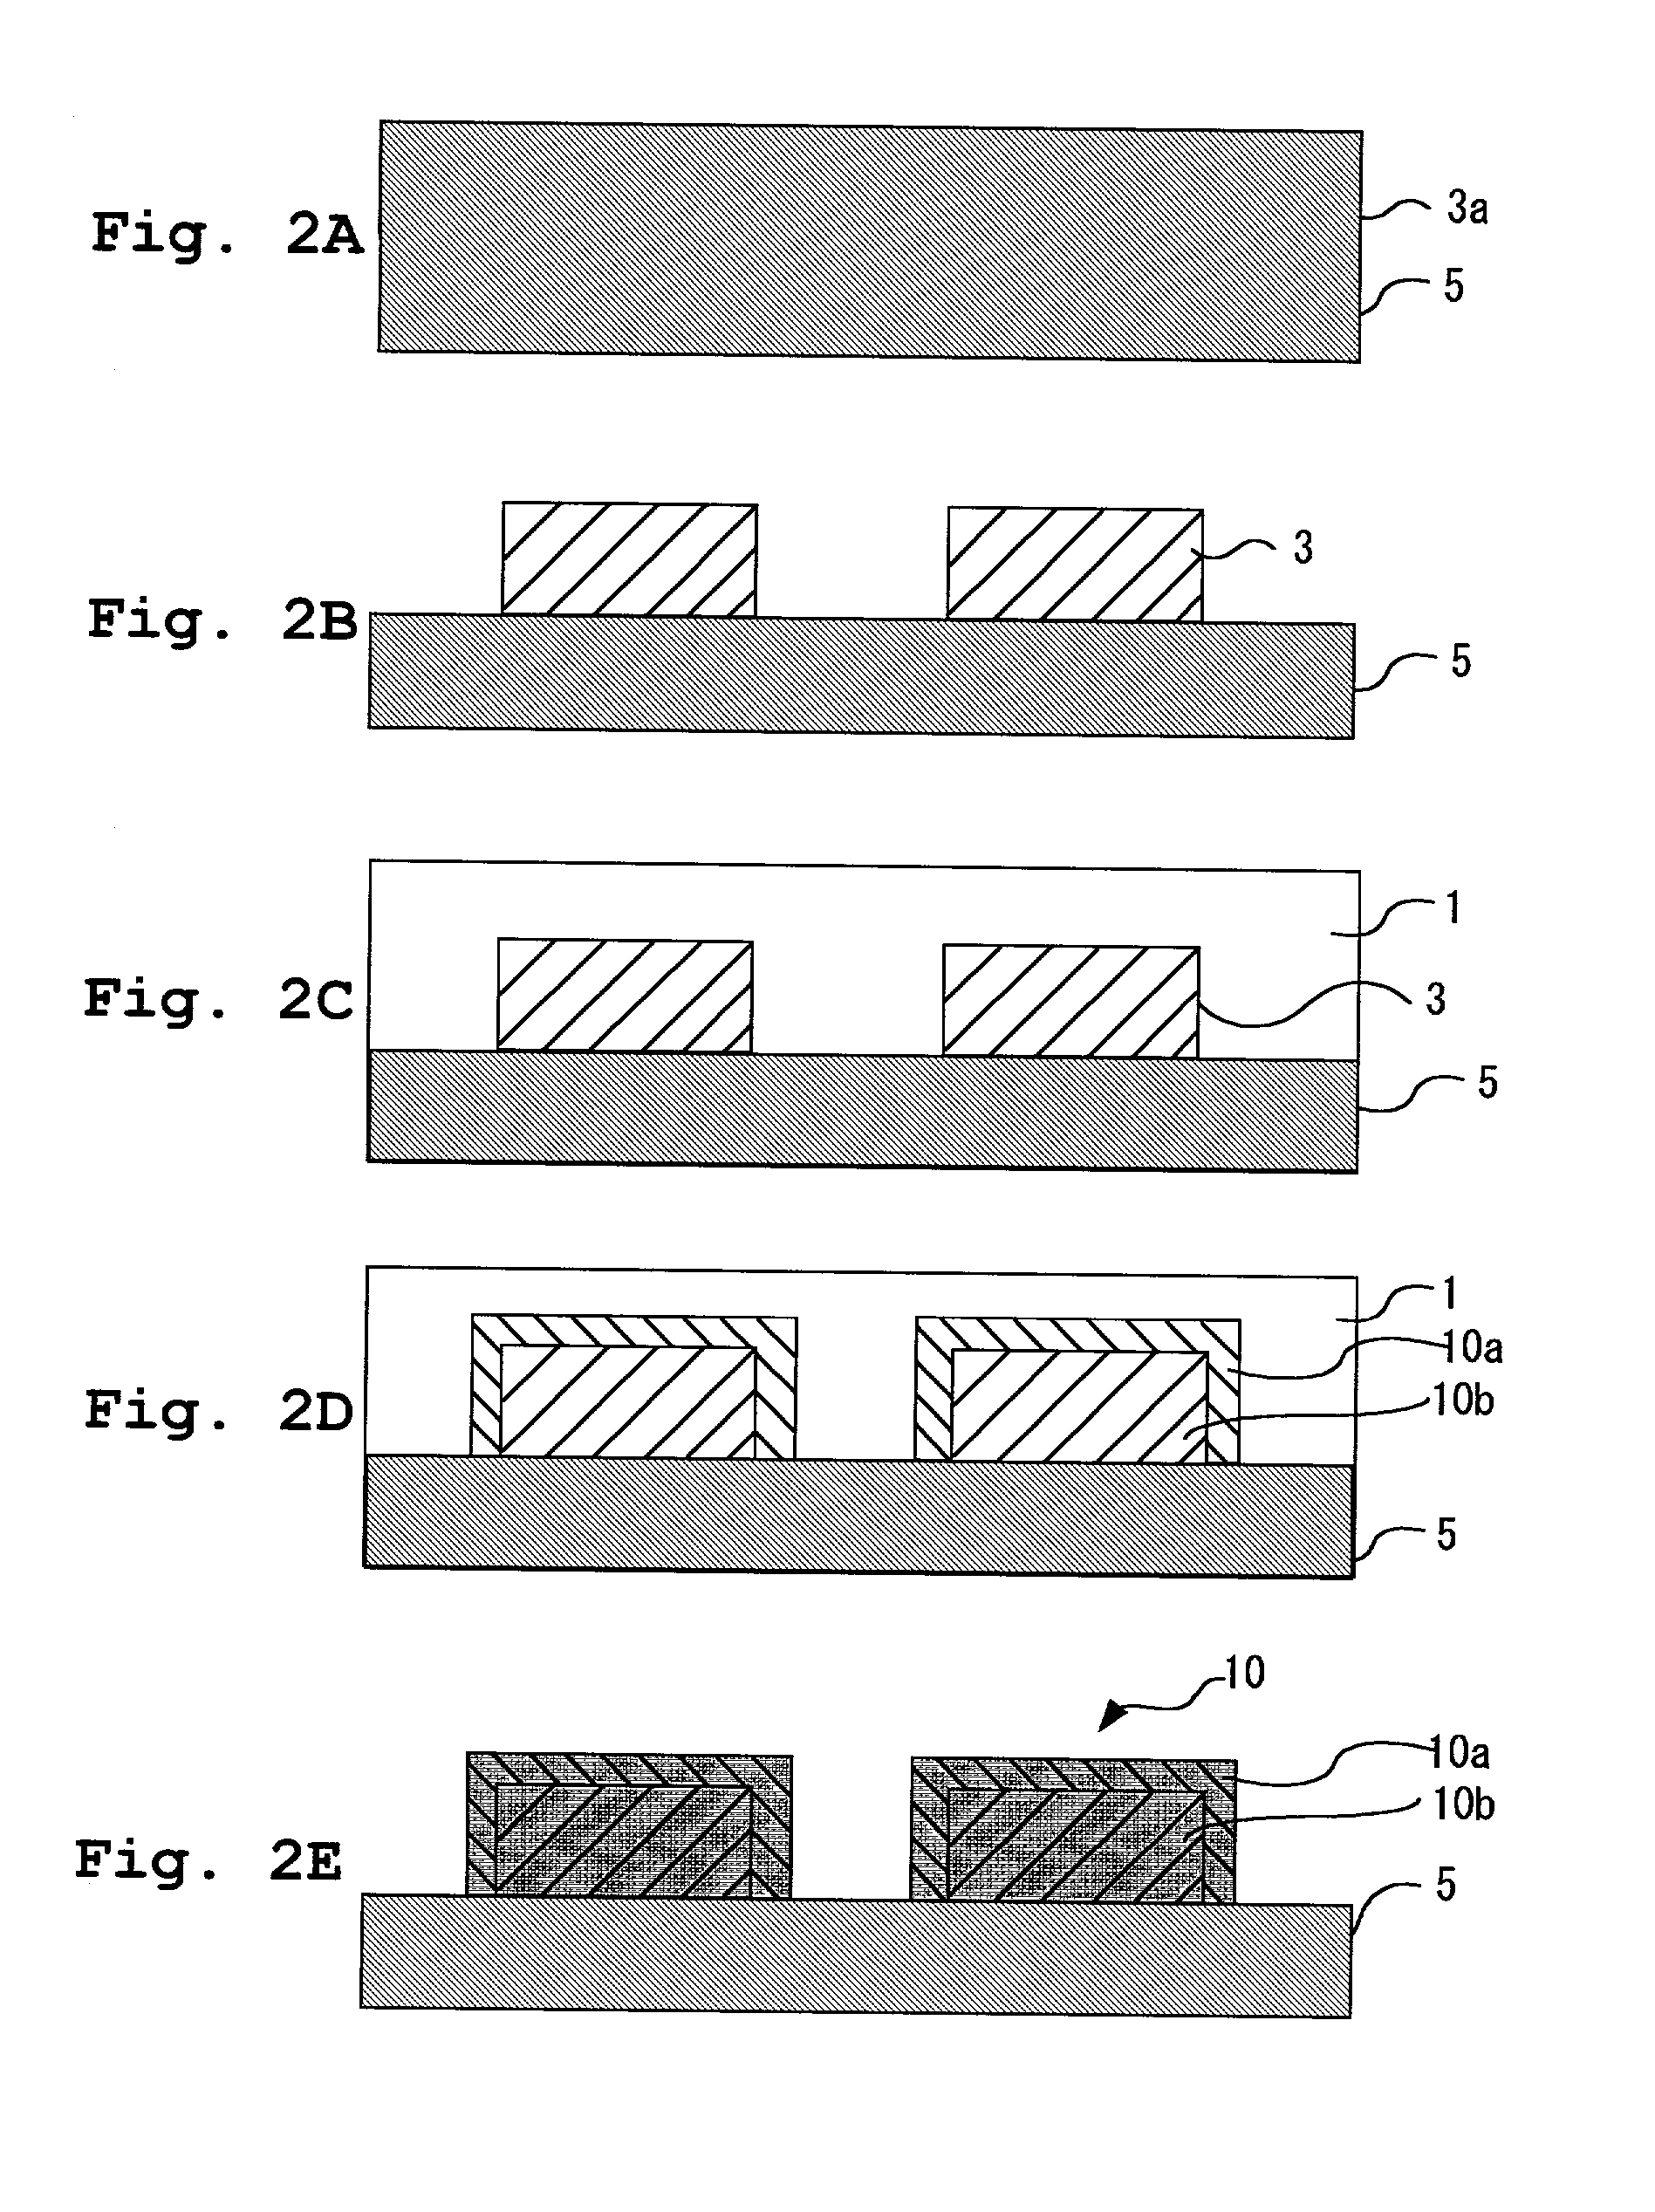 Resist pattern thickening material, resist pattern and forming method thereof, and semiconductor device and manufacturing method thereof